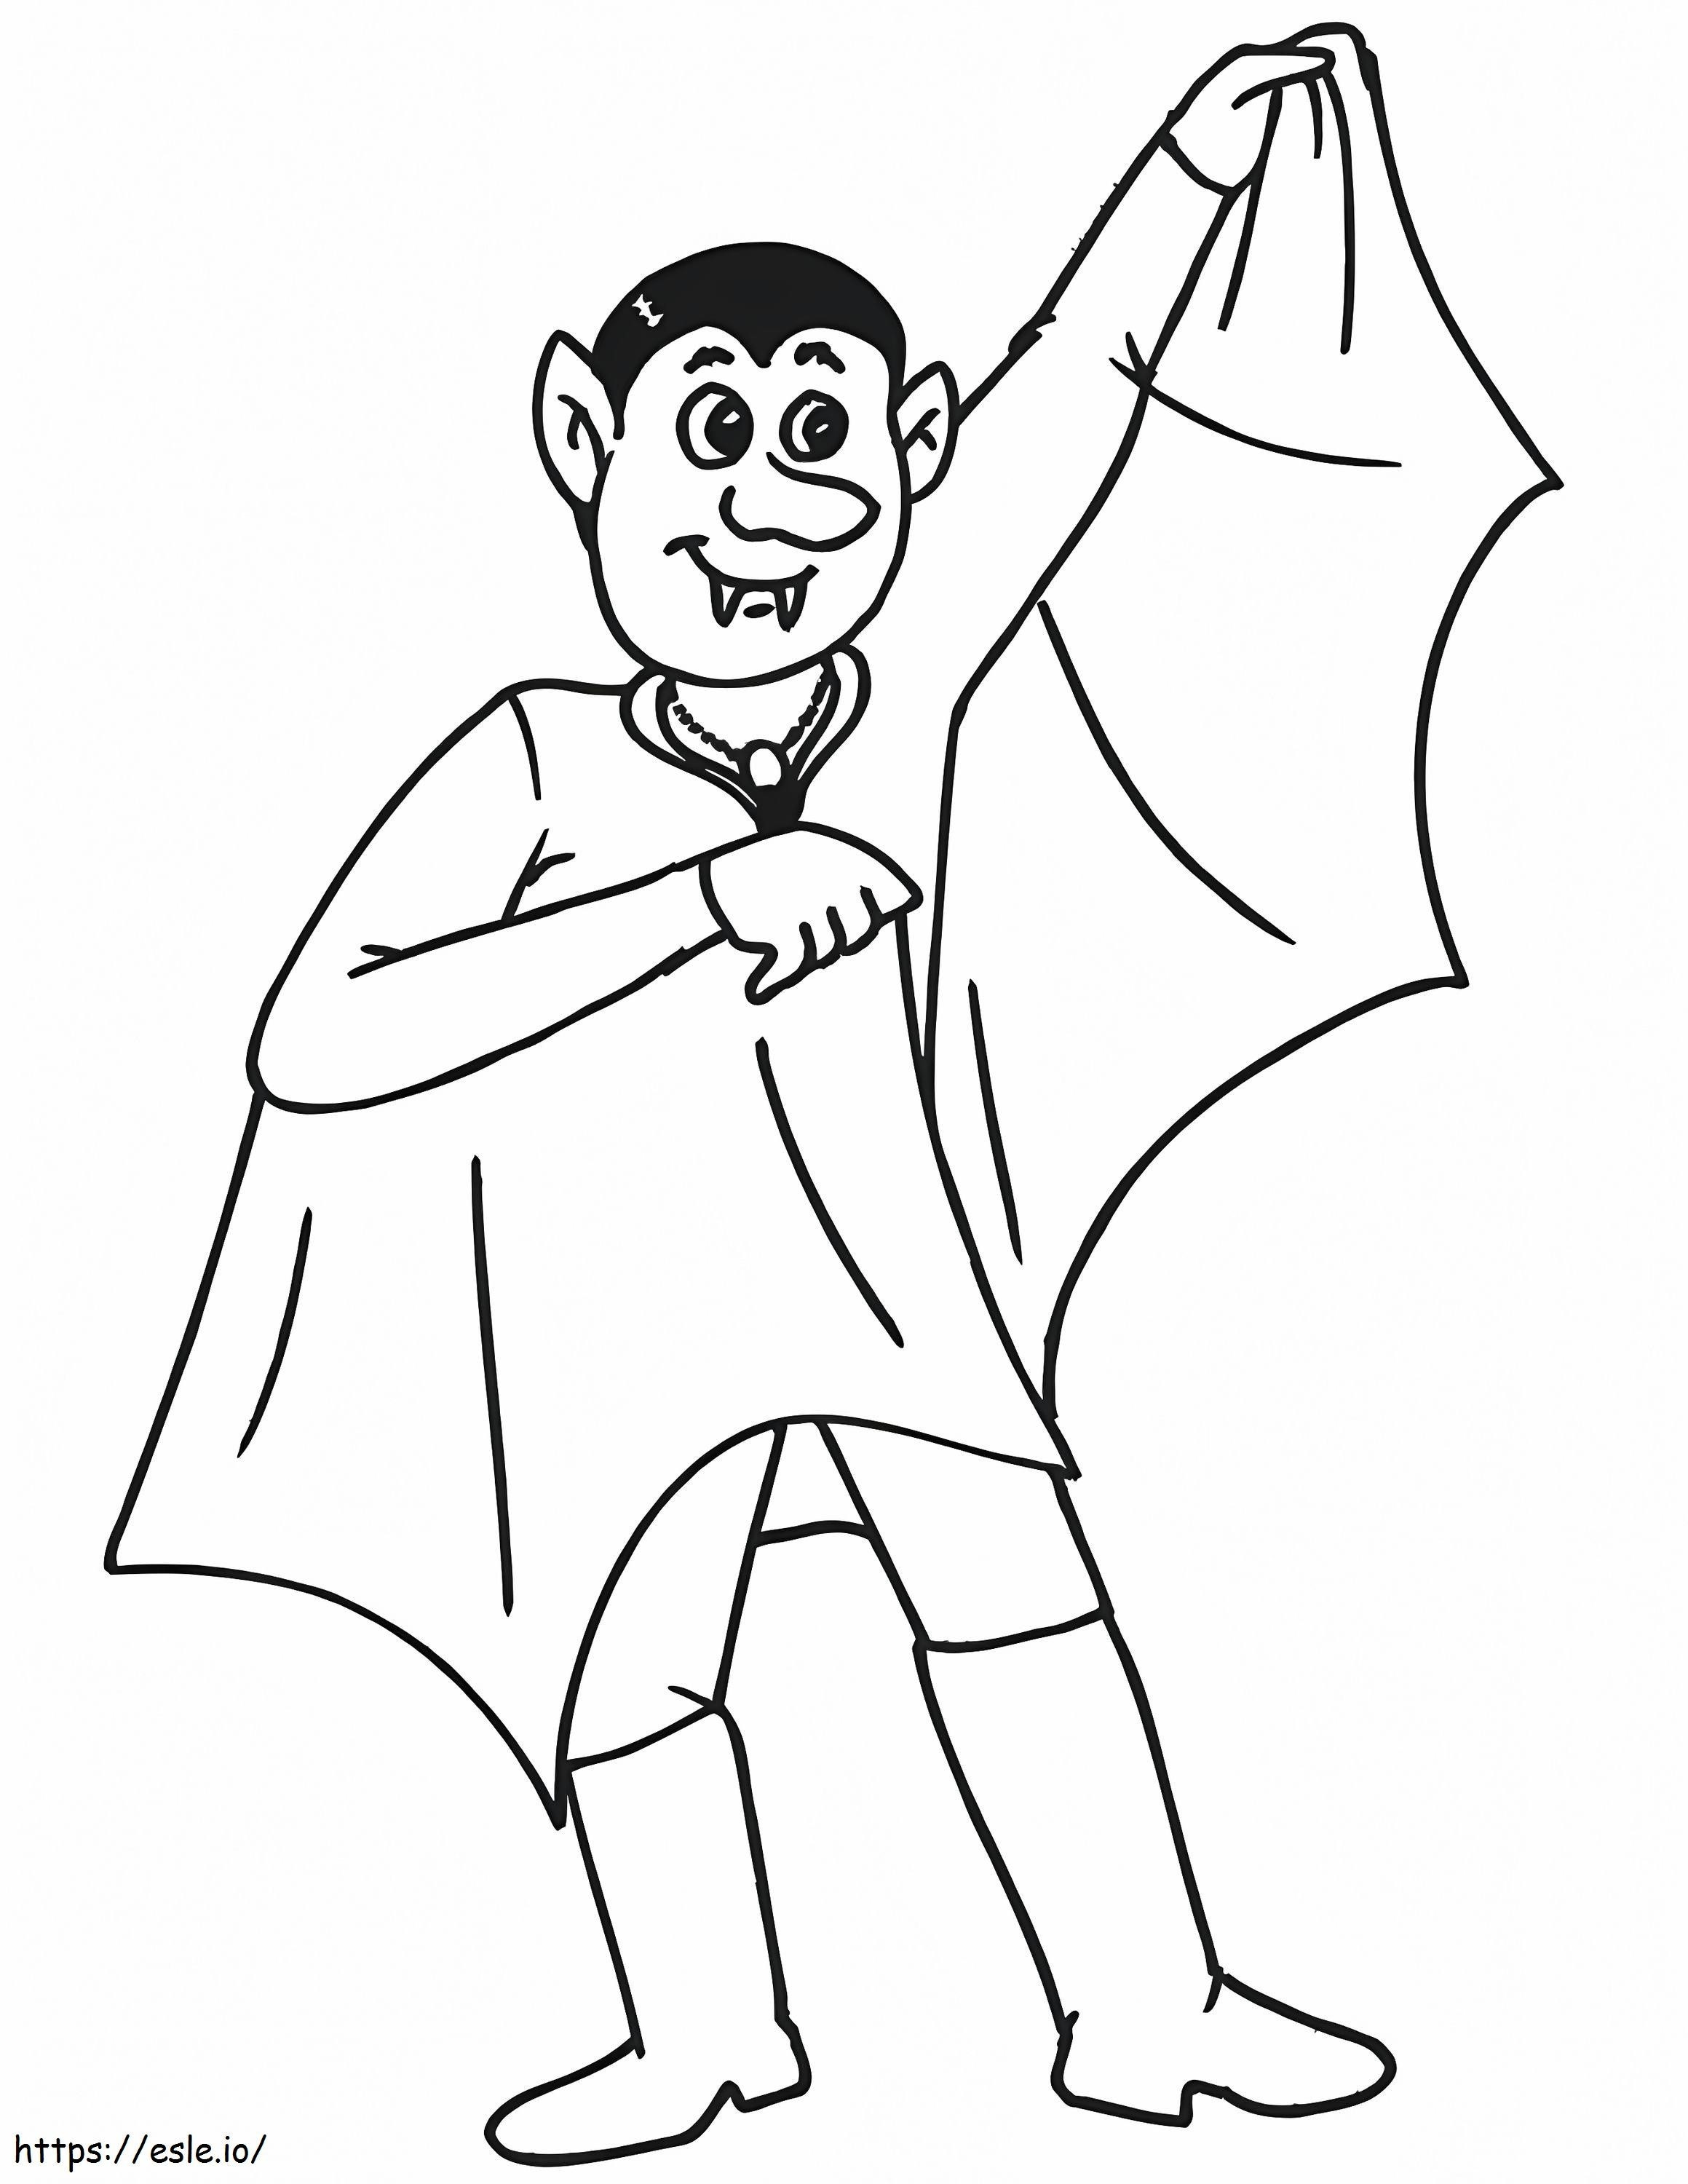 Vampire 5 coloring page